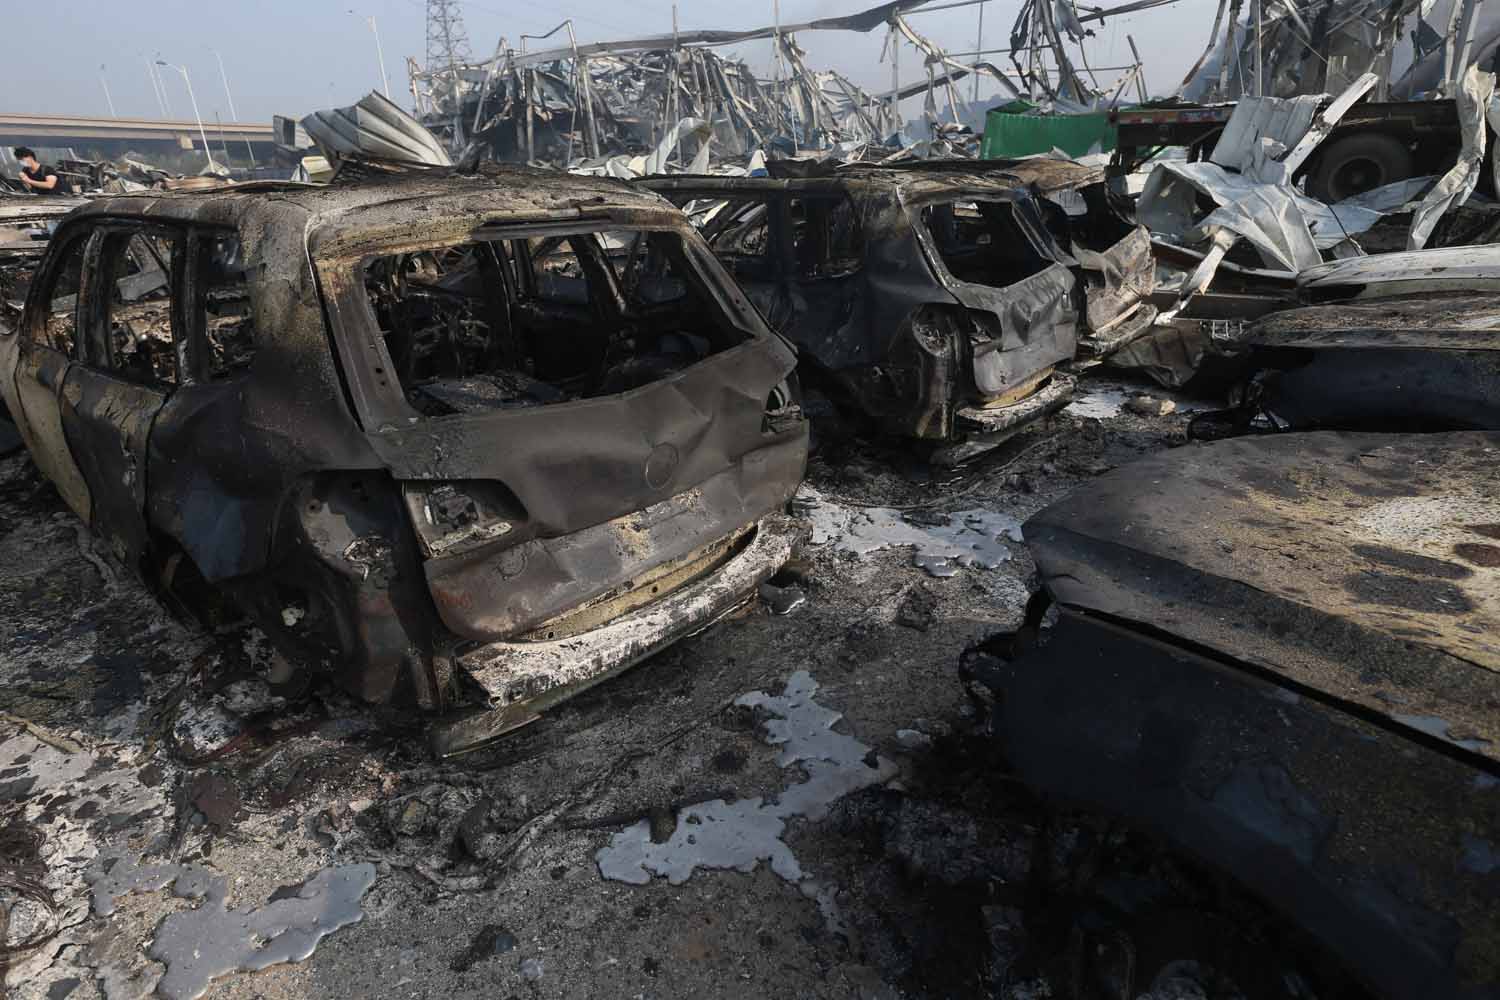 TIANJIN, CHINA - AUGUST 13: (CHINA OUT) Burnt cars are seen in the debris following the explosions of a warehouse in Binhai New Area on August 13, 2015 in Tianjin, China. At least 17 people dead, 32 are in critical condition and at least another 400 injured during the explosions of a warehouse on late Wednesday in Binhai New Area in Tianjin, according to police authority.  (Photo by ChinaFotoPress/ChinaFotoPress via Getty Images)